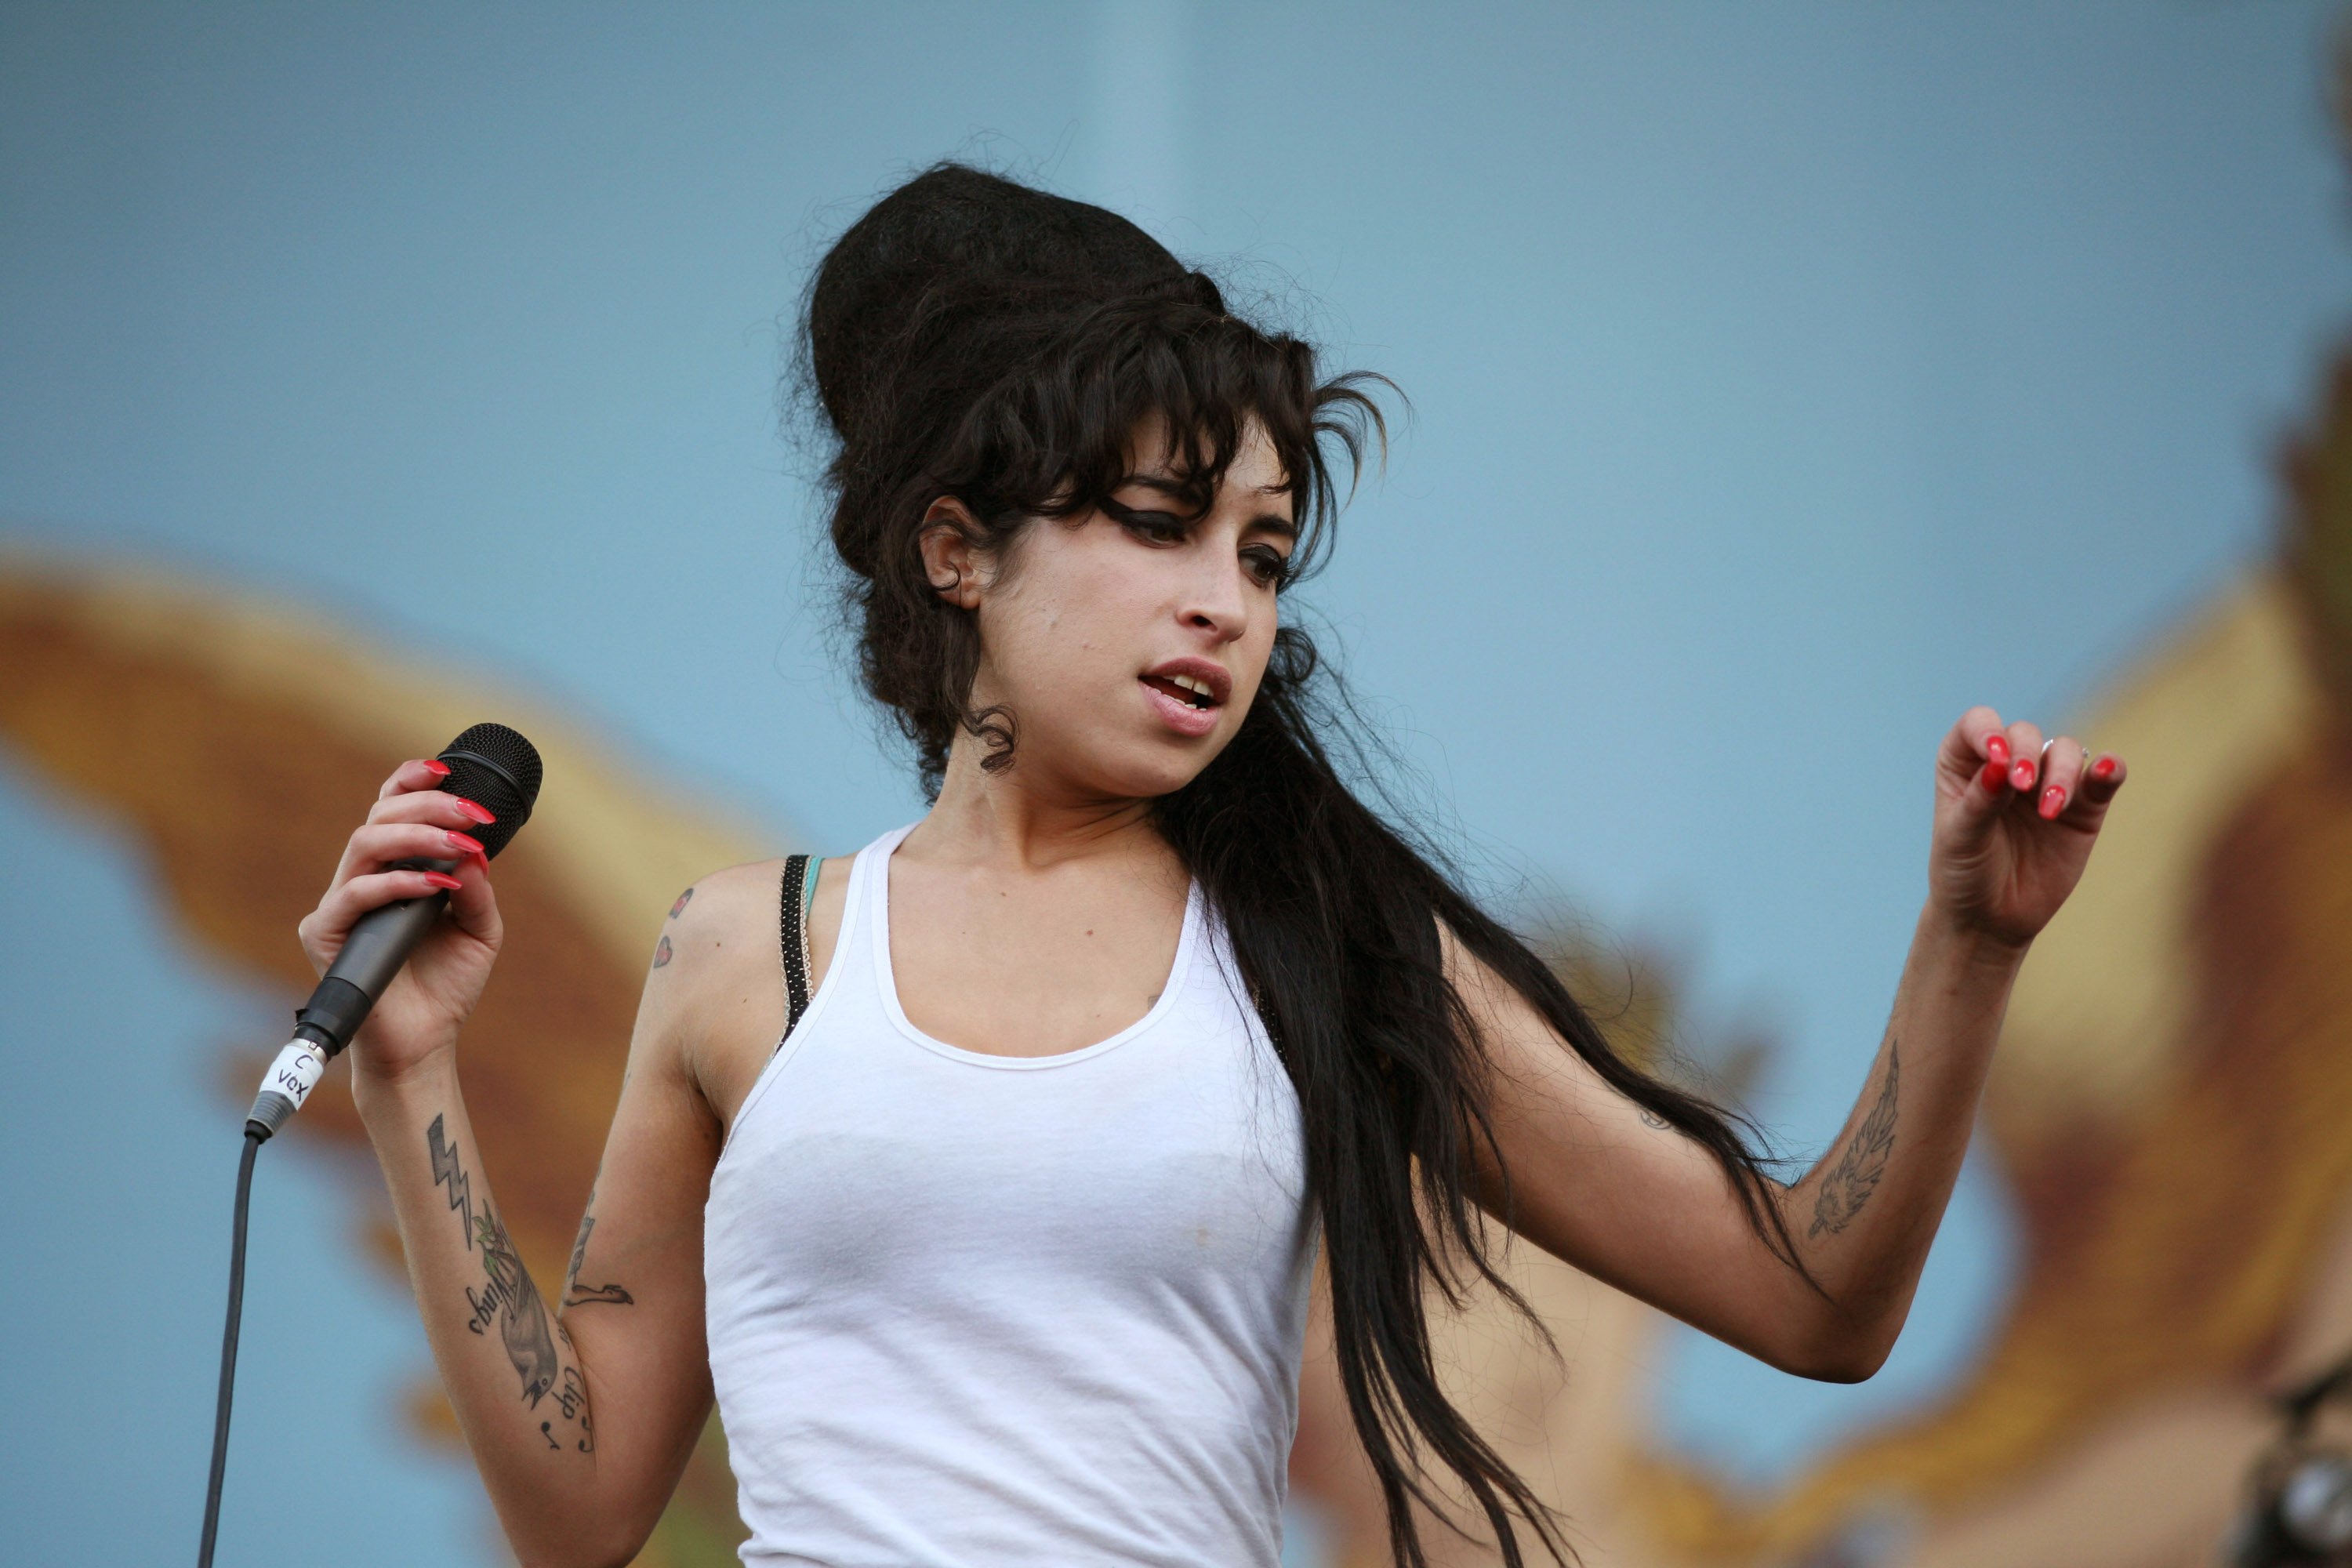 Amy Winehouse during Isle of Wight Festival - Day 2 at Seaclose Park in Newport, Isle of Wight, United Kingdom. | Source: Getty Images